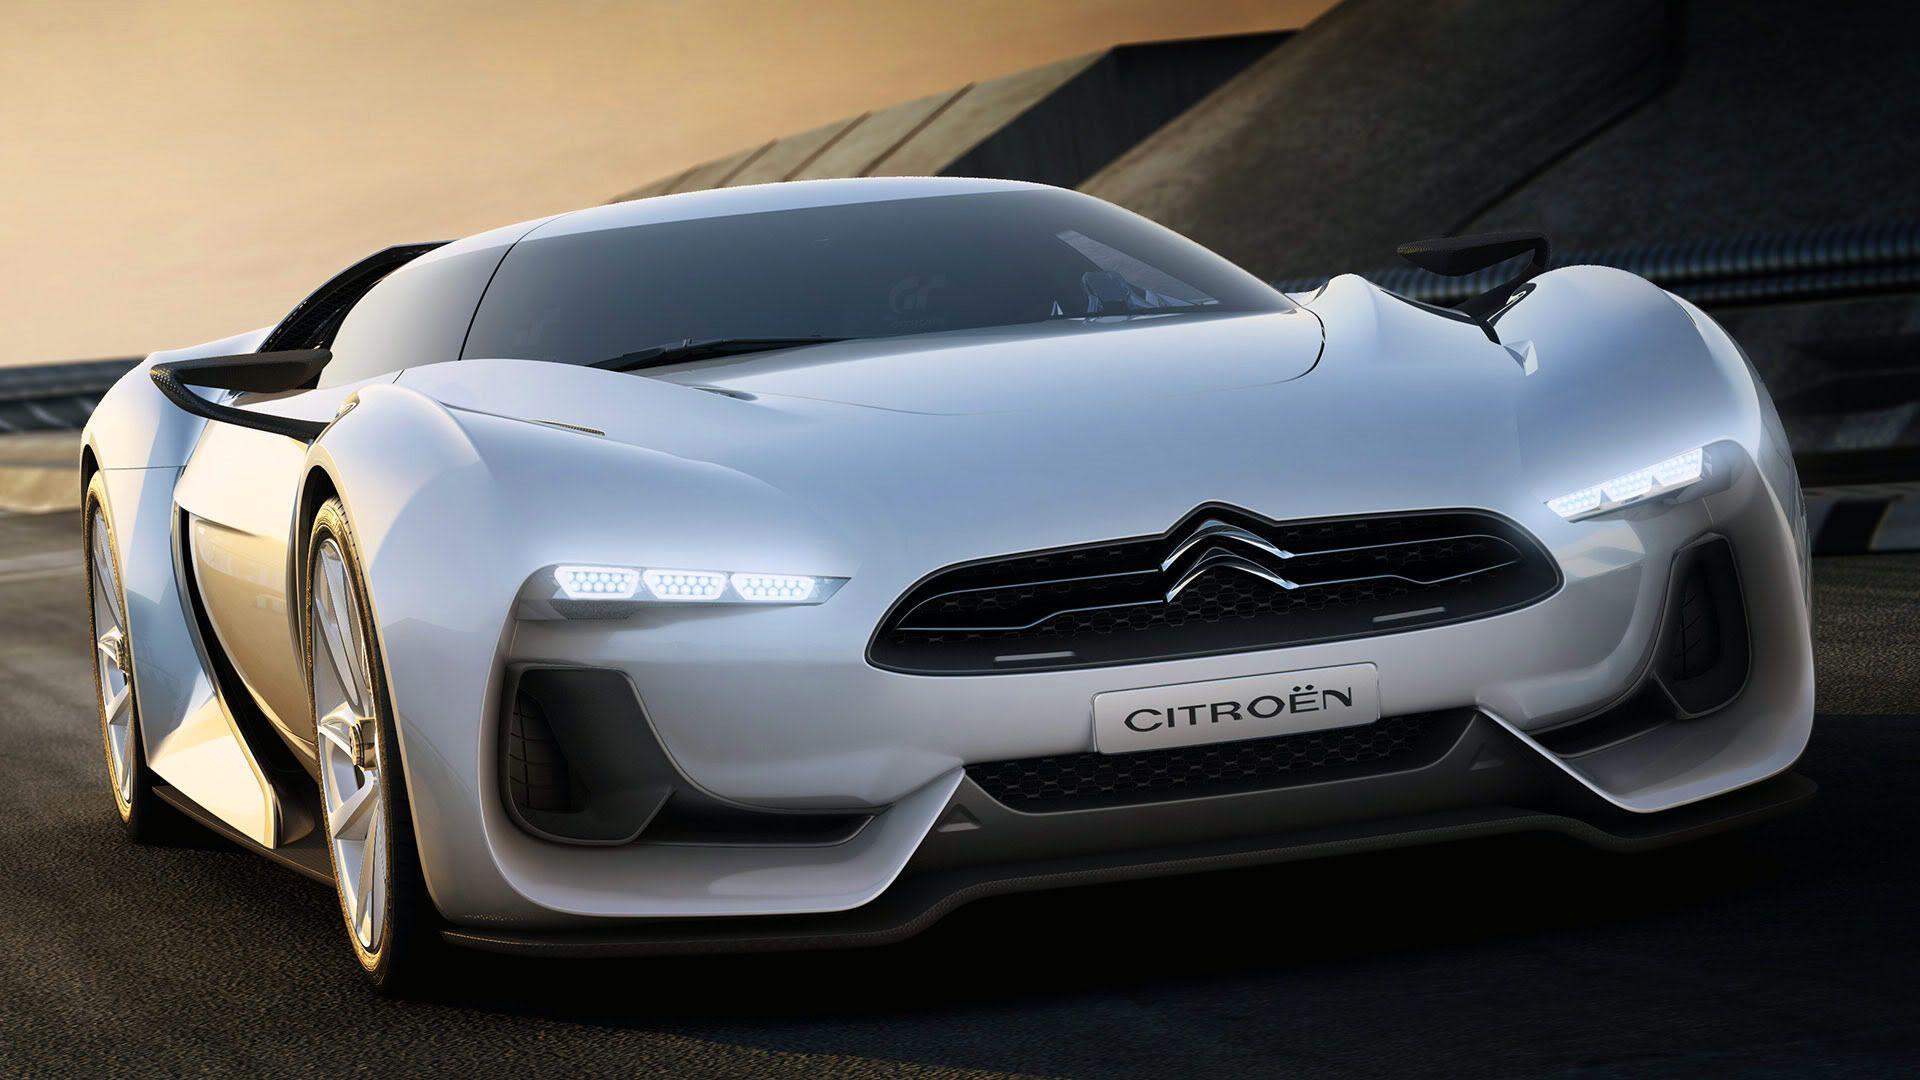 Citroen Picture Wallpaper for PC. Full HD Picture